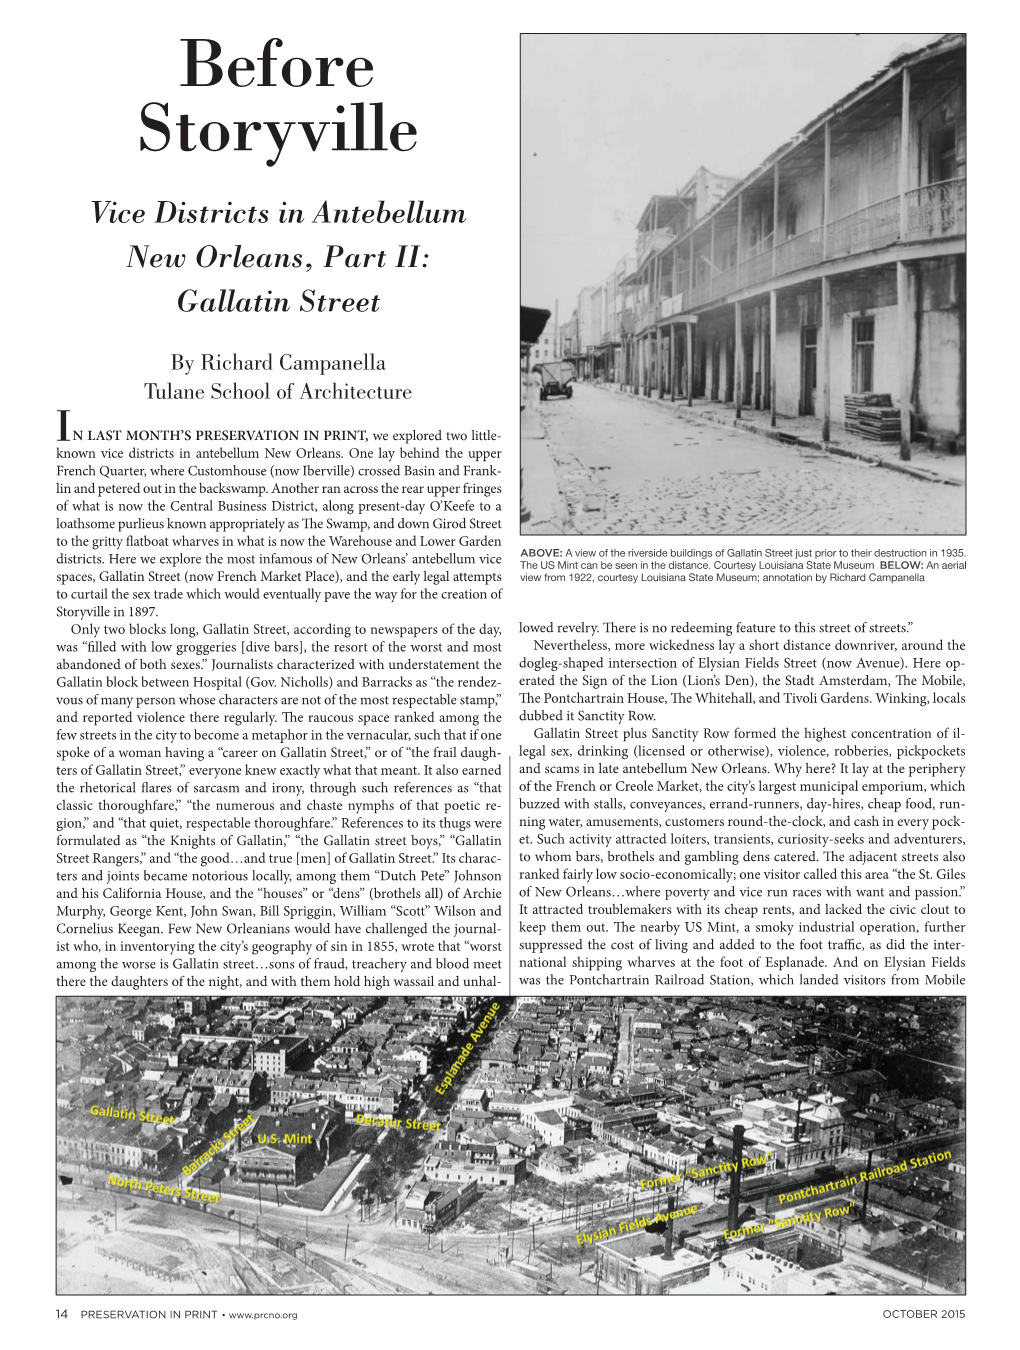 Before Storyville Vice Districts in Antebellum New Orleans, Part II: Gallatin Street